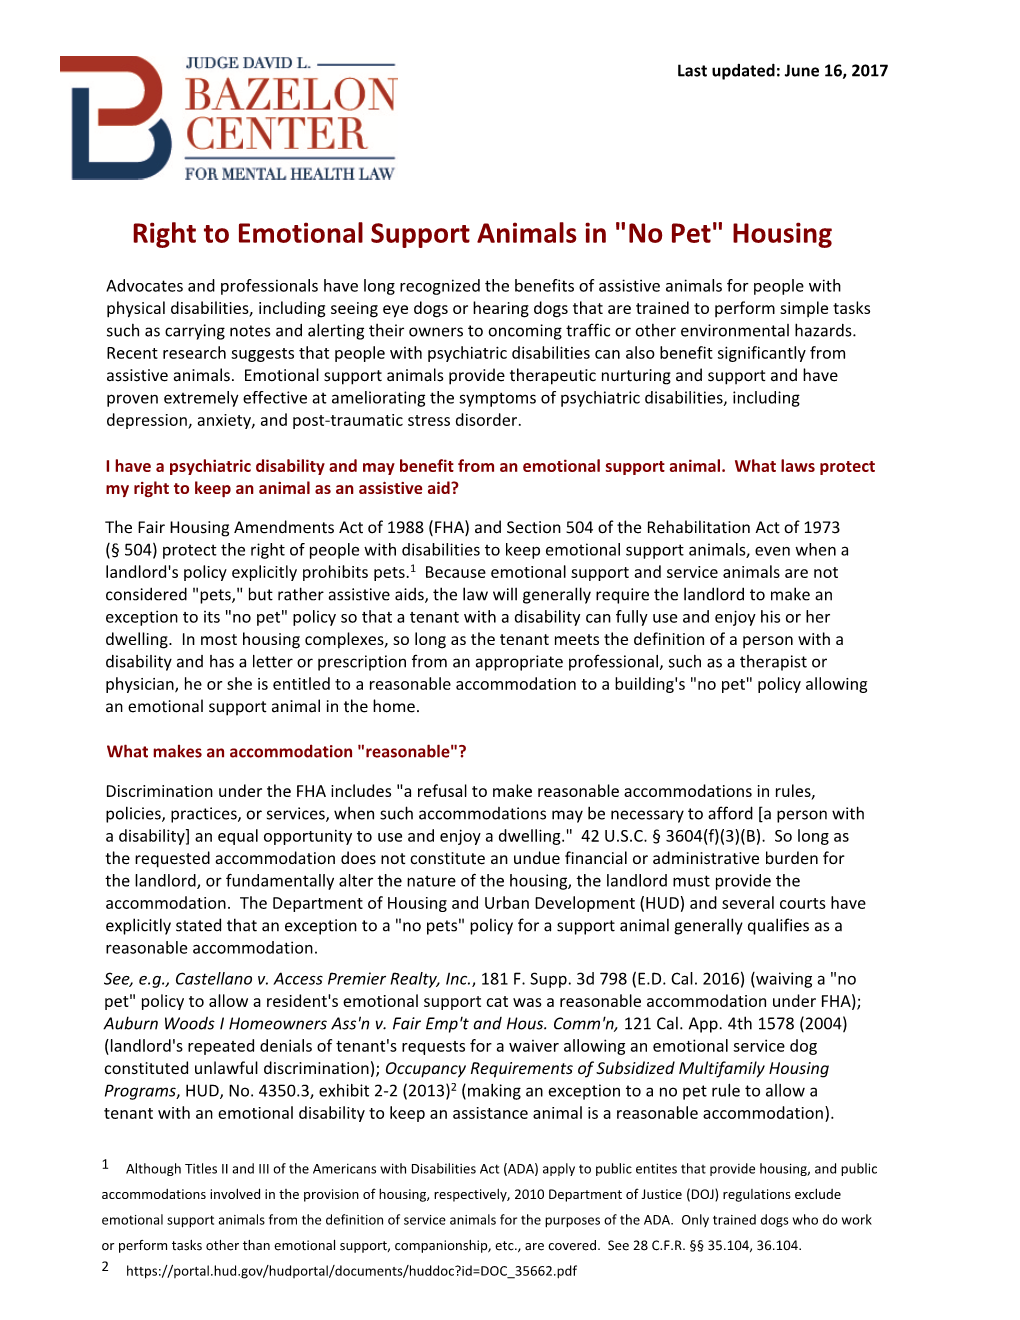 Right to Emotional Support Animals in "No Pet" Housing